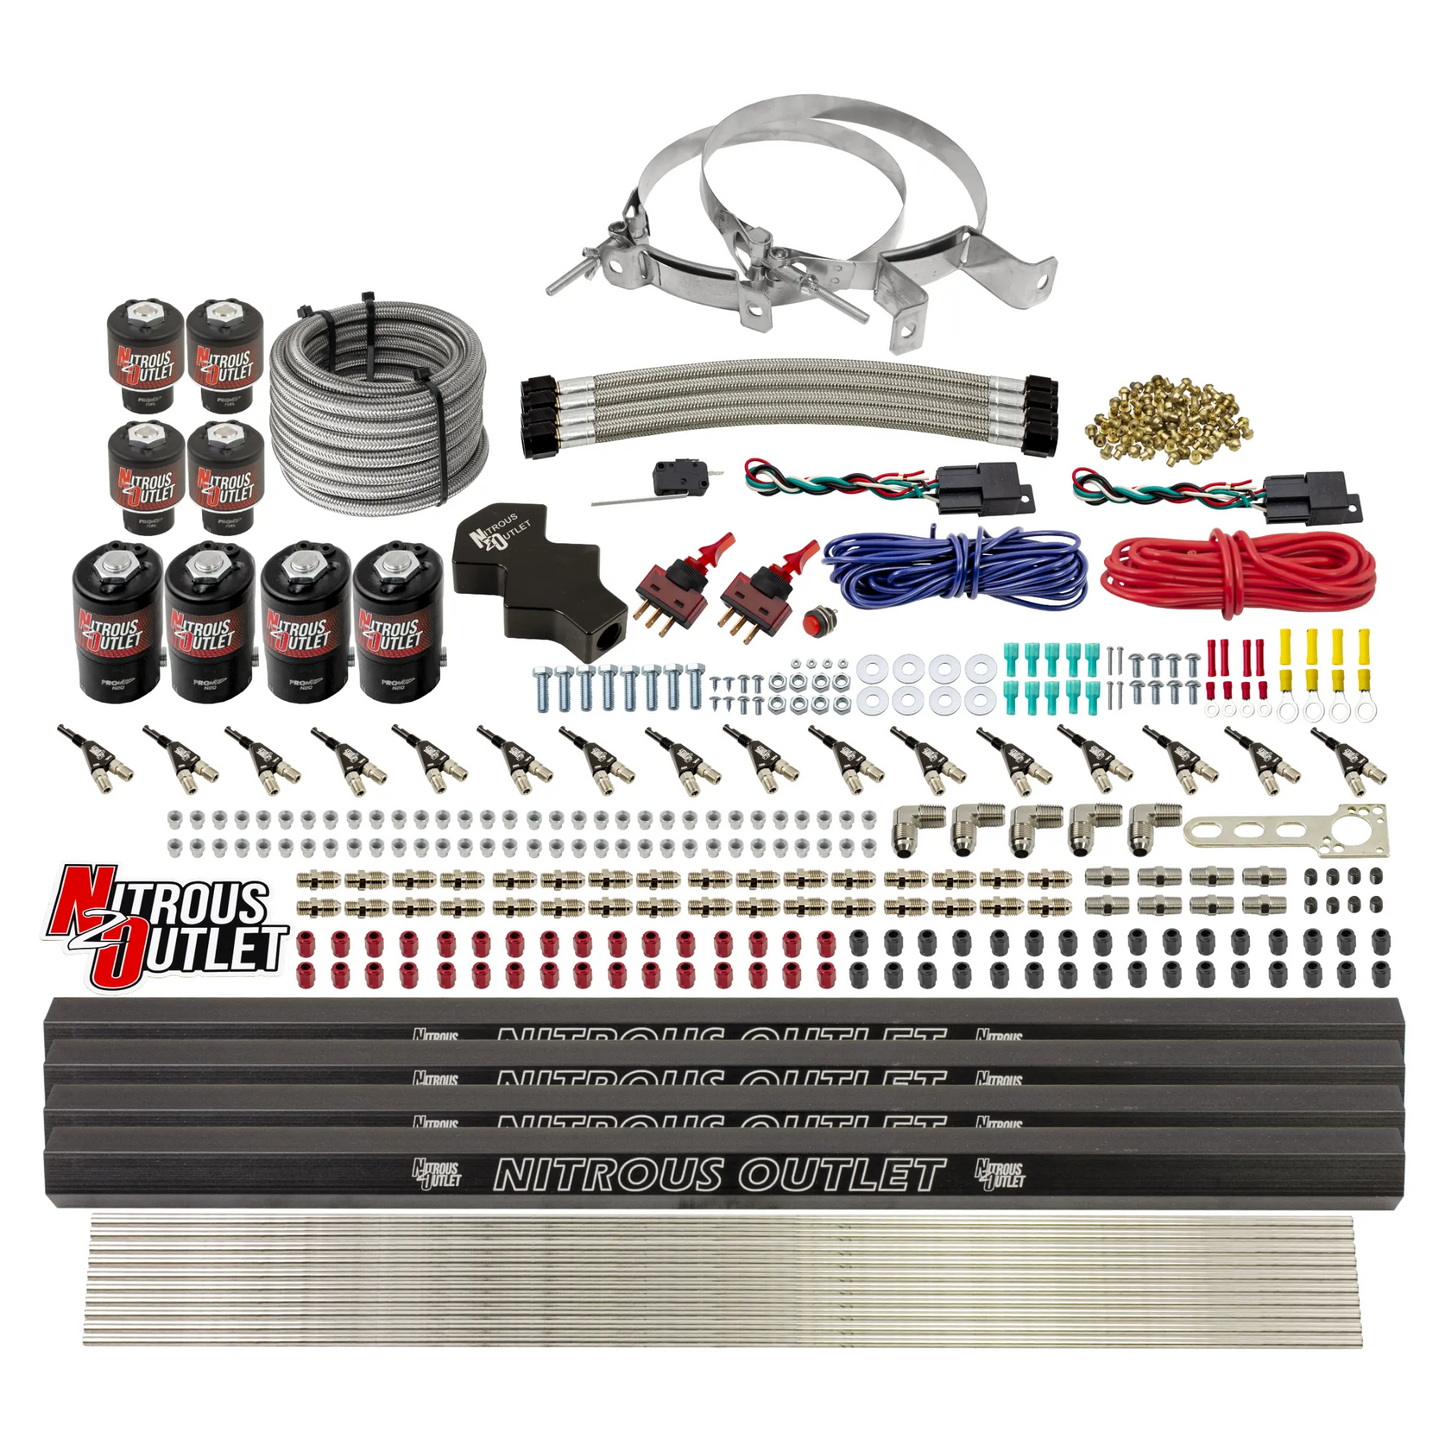 8 Cylinder Dual Stage Direct Port Nitrous System with Injection Rails - E85 - .112 Nitrous/ .177 Fuel - 45-55 PSI